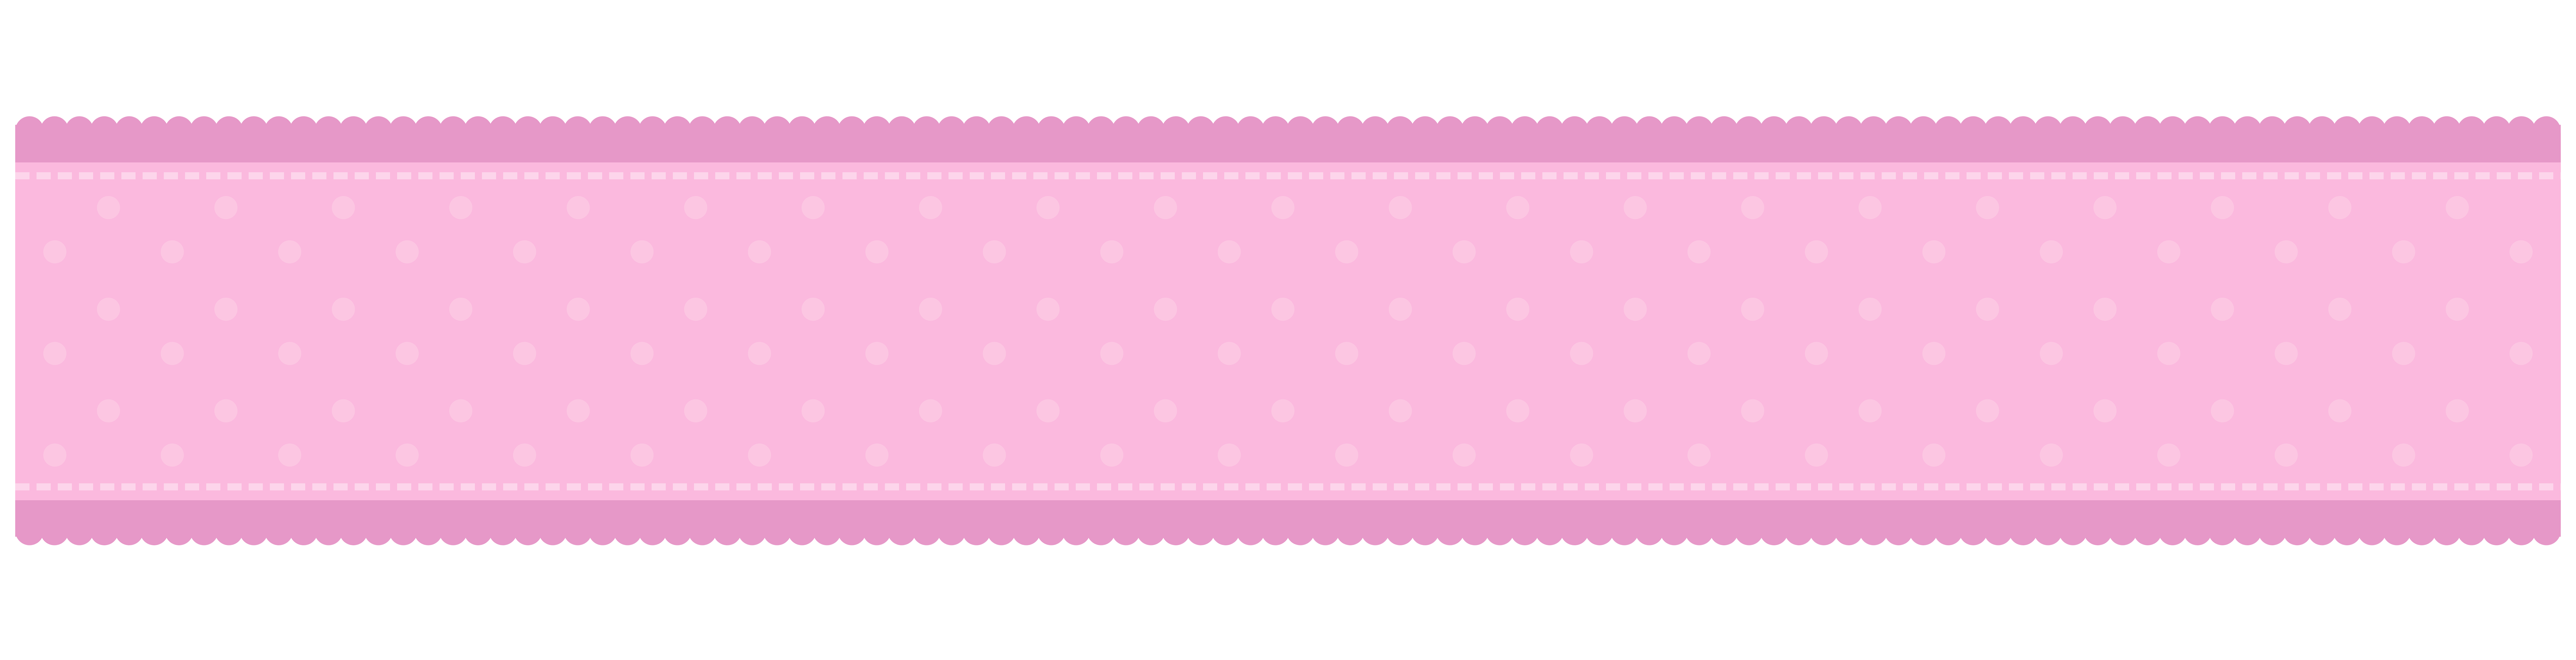 Pattern clipart banner. Pink decorative border with